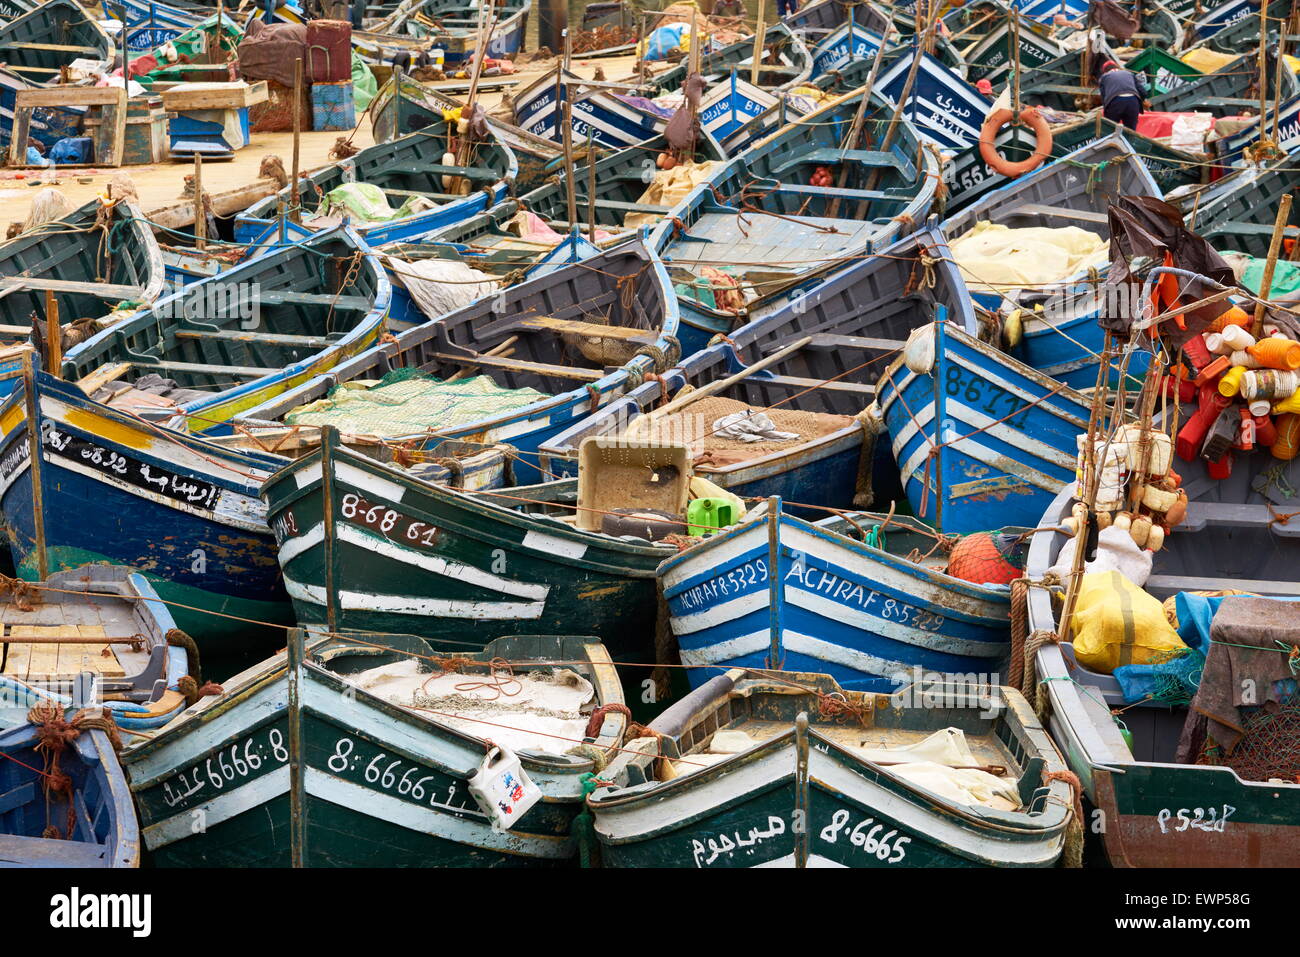 Agadir, fishing boats in old port. Morocco Stock Photo